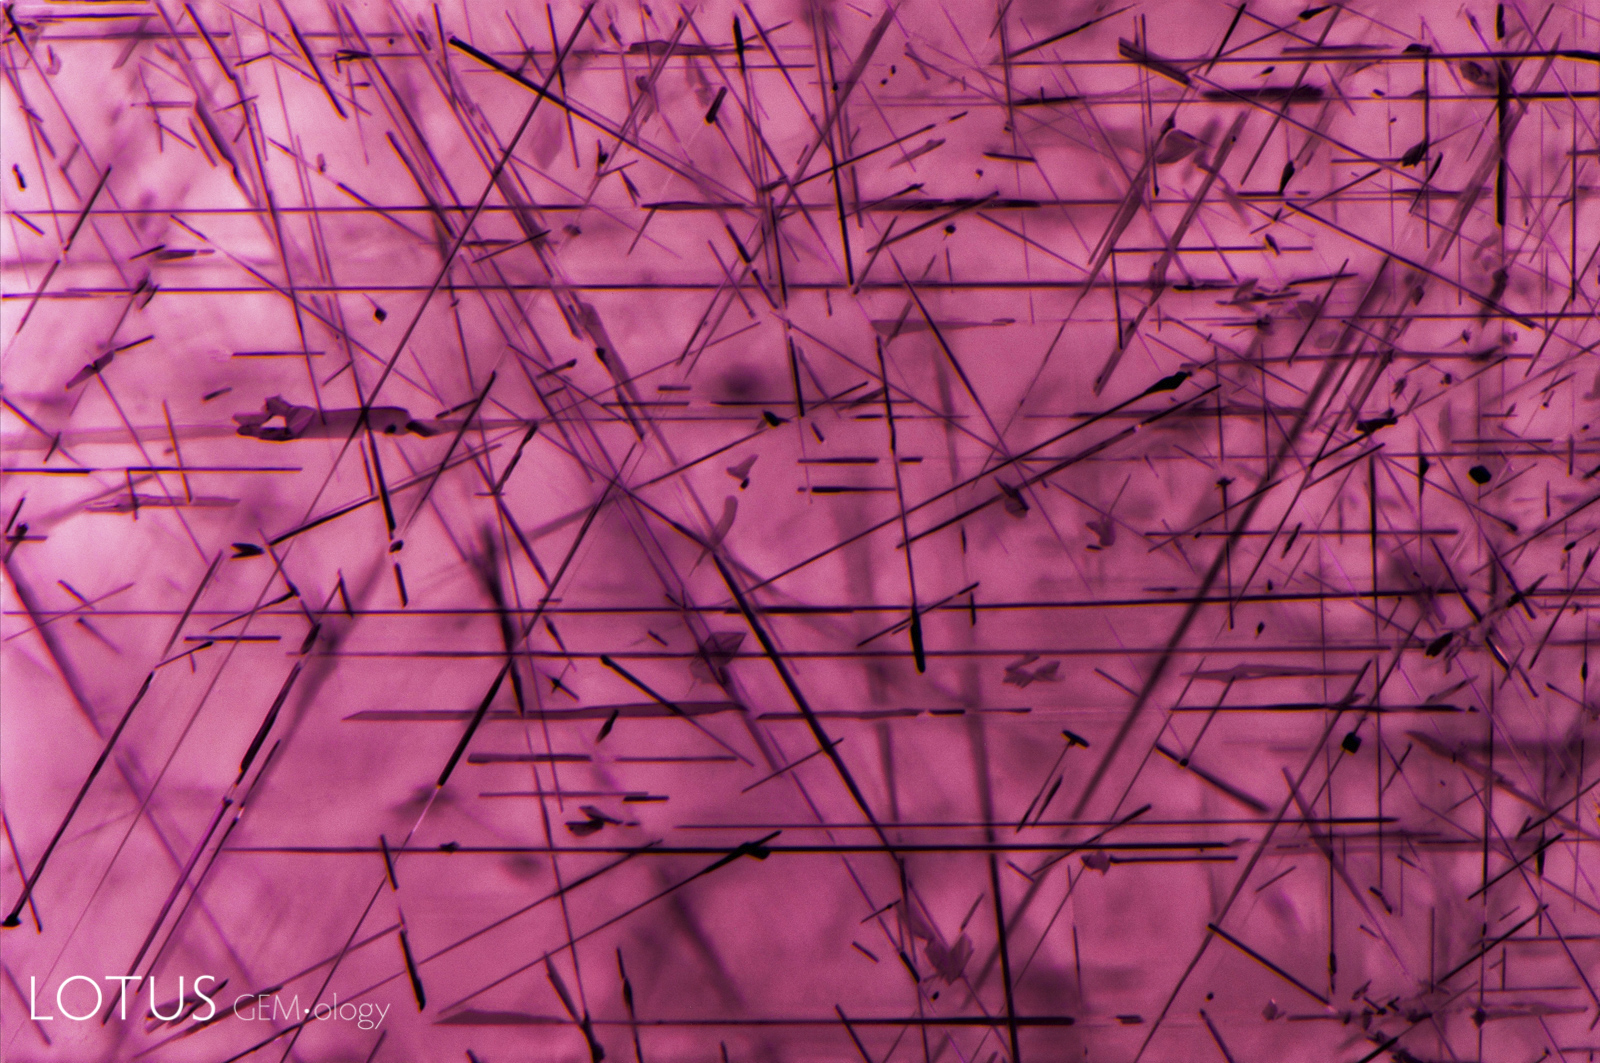 Crystallographically oriented acicular inclusions of ilmenite and rutile result in 6-rayed asterism in their host spinel from Sri Lanka.